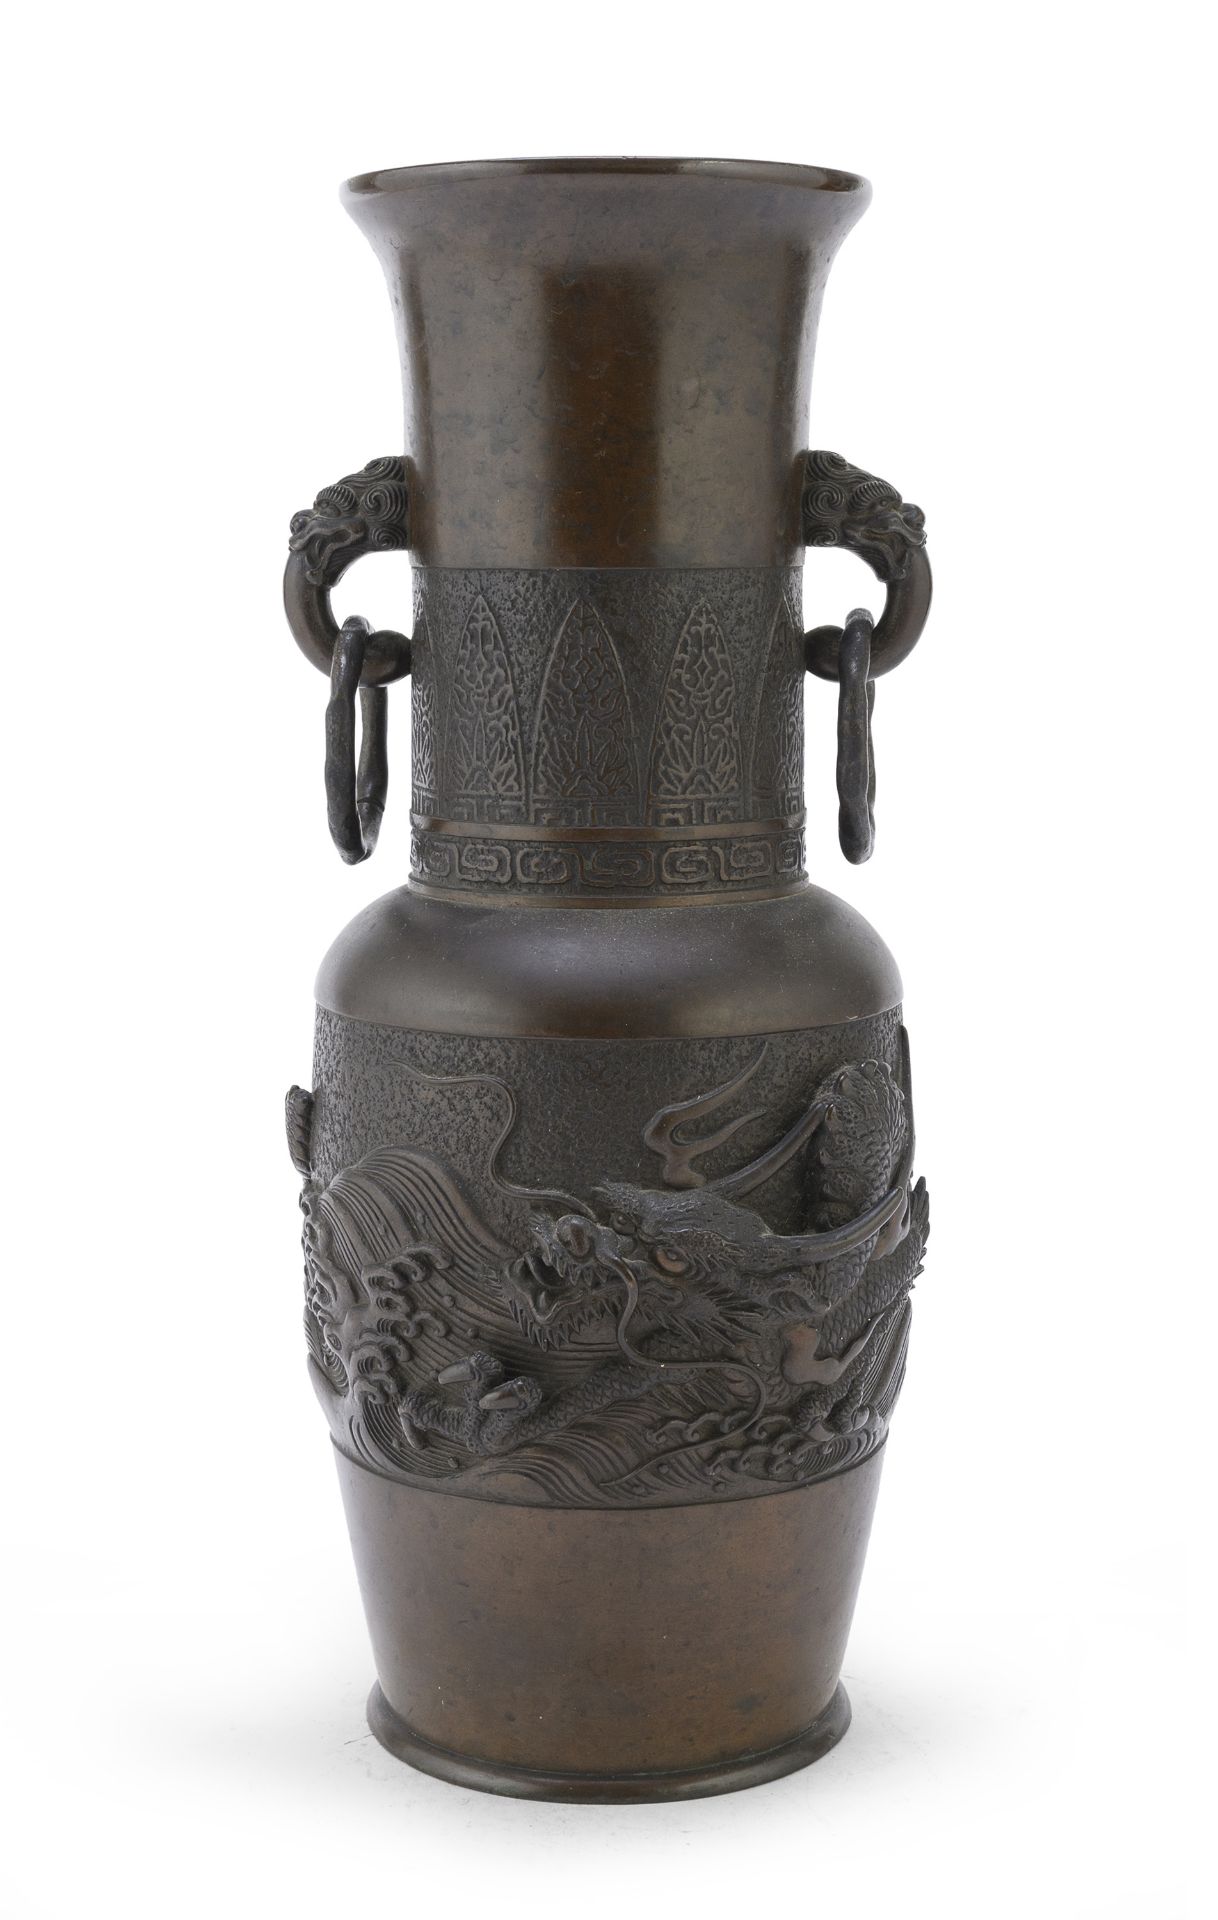 A BRONZE VASE JAPAN LATE 19TH EARLY 20TH CENTURY